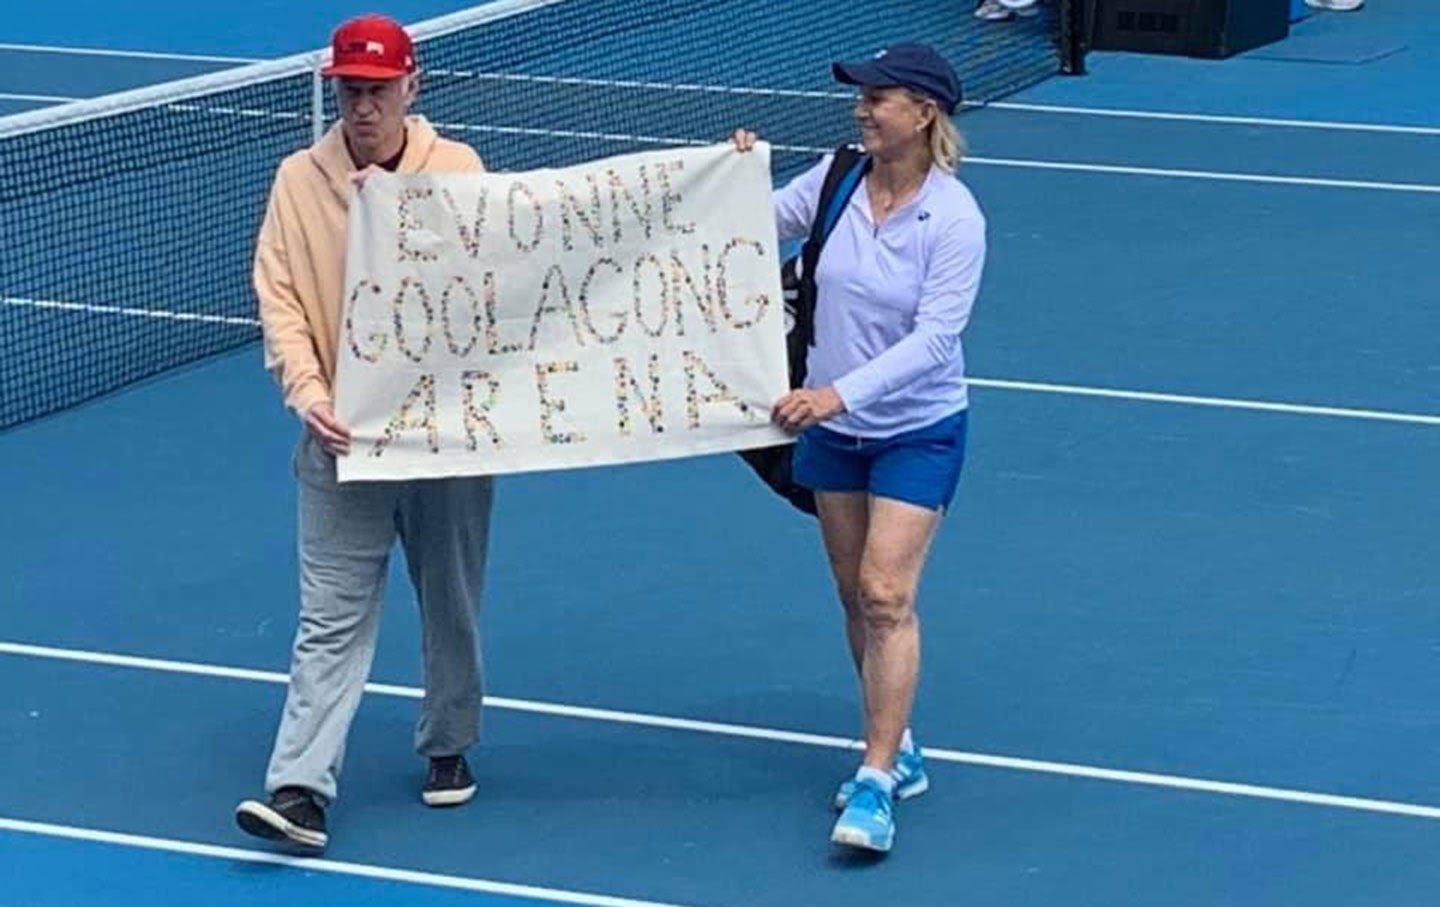 John McEnroe and Martina Navratilova walk onto the court at the Australian Open with a banner that reads 